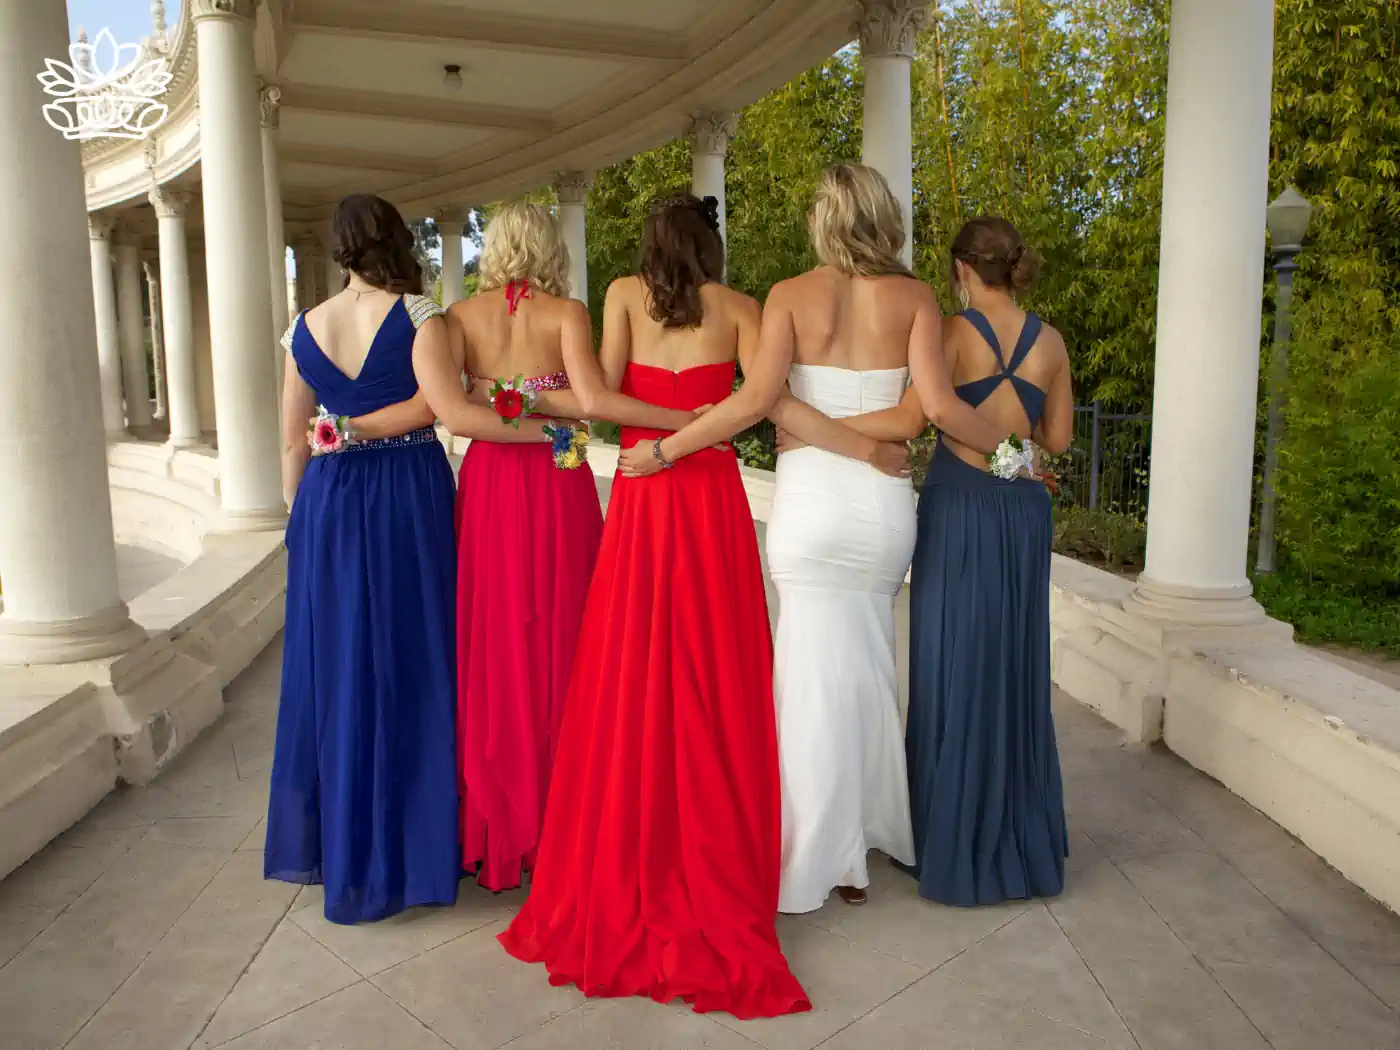 Rear view of five young women at a matric dance, arm in arm under a columned pavilion, each adorned in vibrant formal gowns of red, white, and blue and matching floral wrist corsages. Fabulous Flowers and Gifts - Matric Dance. Delivered with Heart.